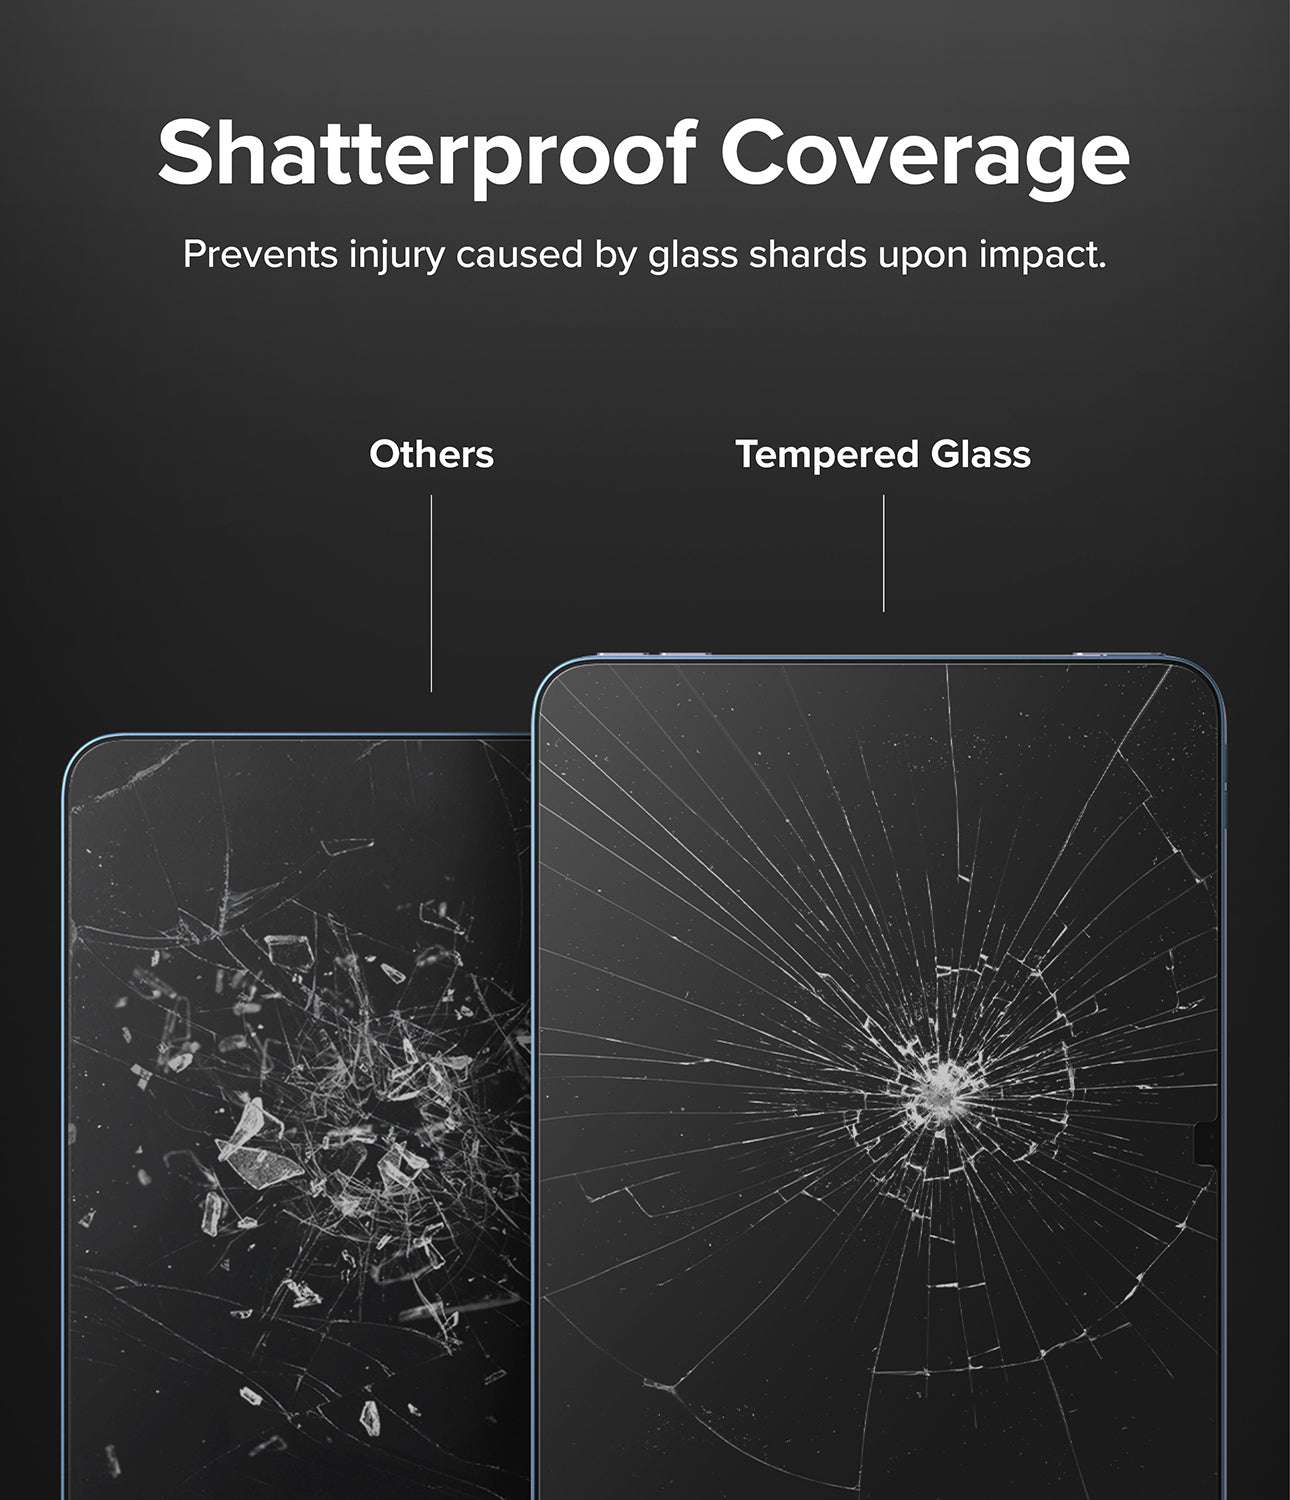 Shatterproof Coverage - Prevents injury caused by glass shards upon impact.